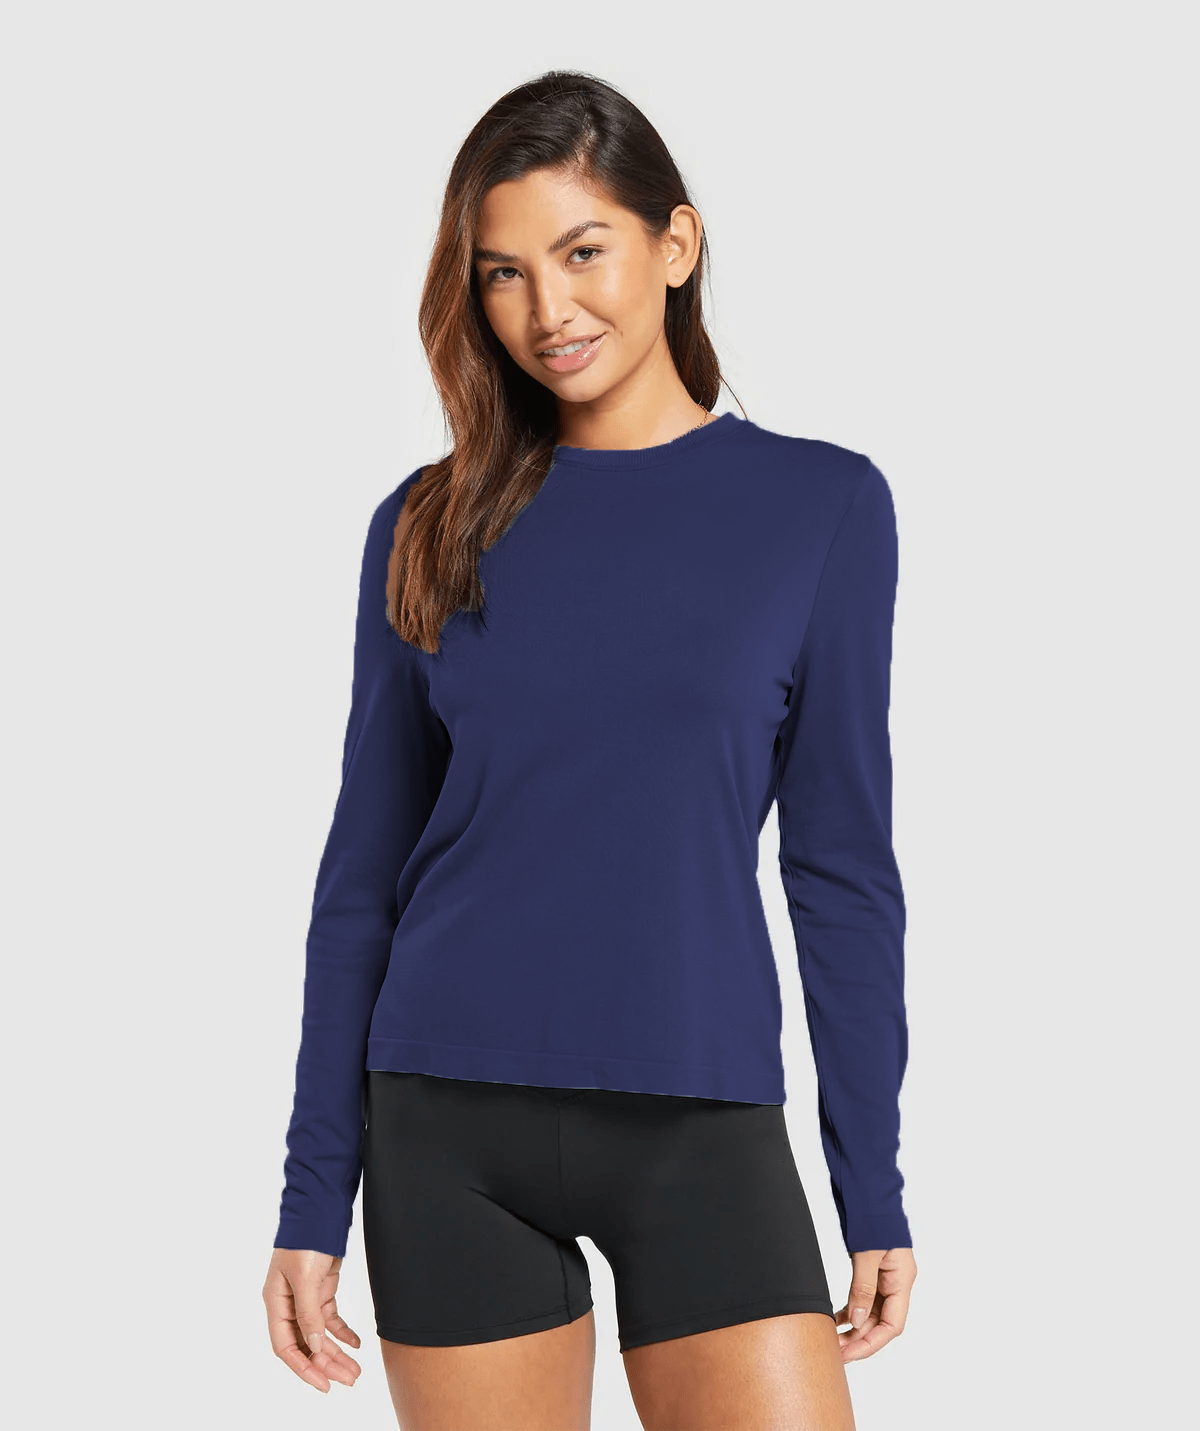 Navy Blue Solid Top